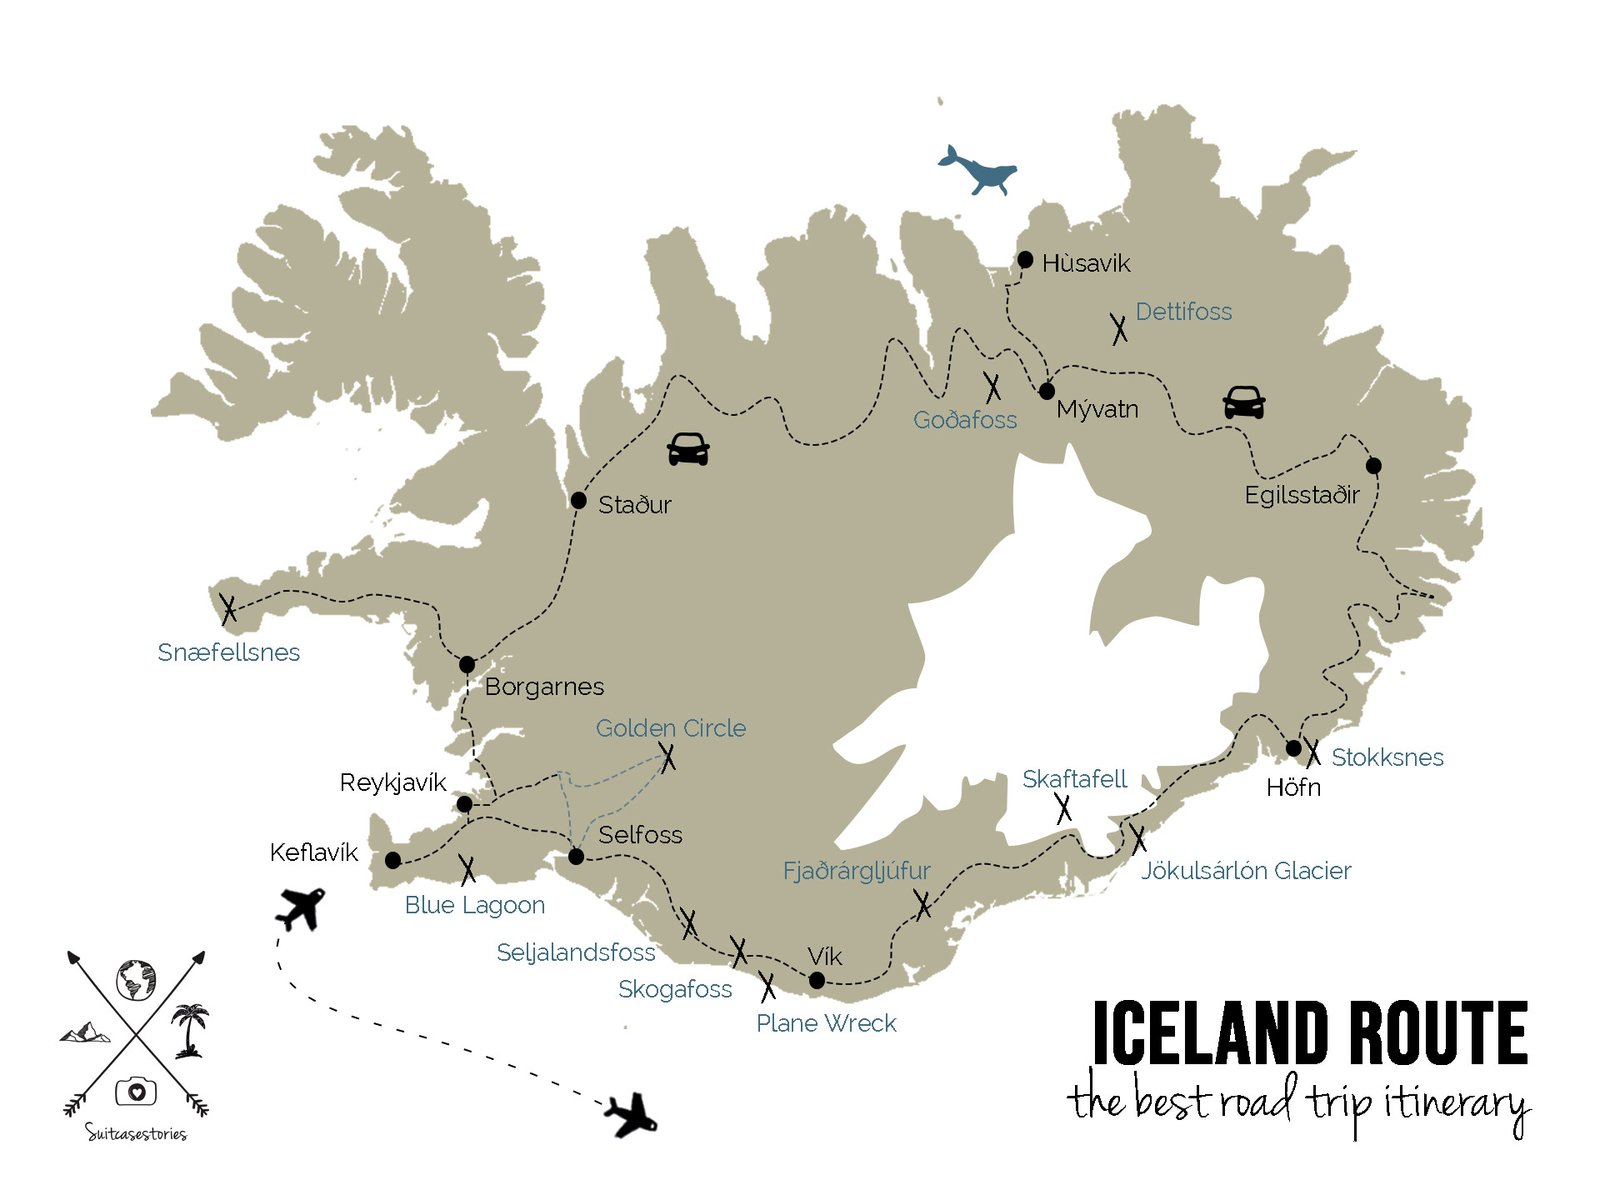 Iceland Route: the best road trip itinerary for 10 days